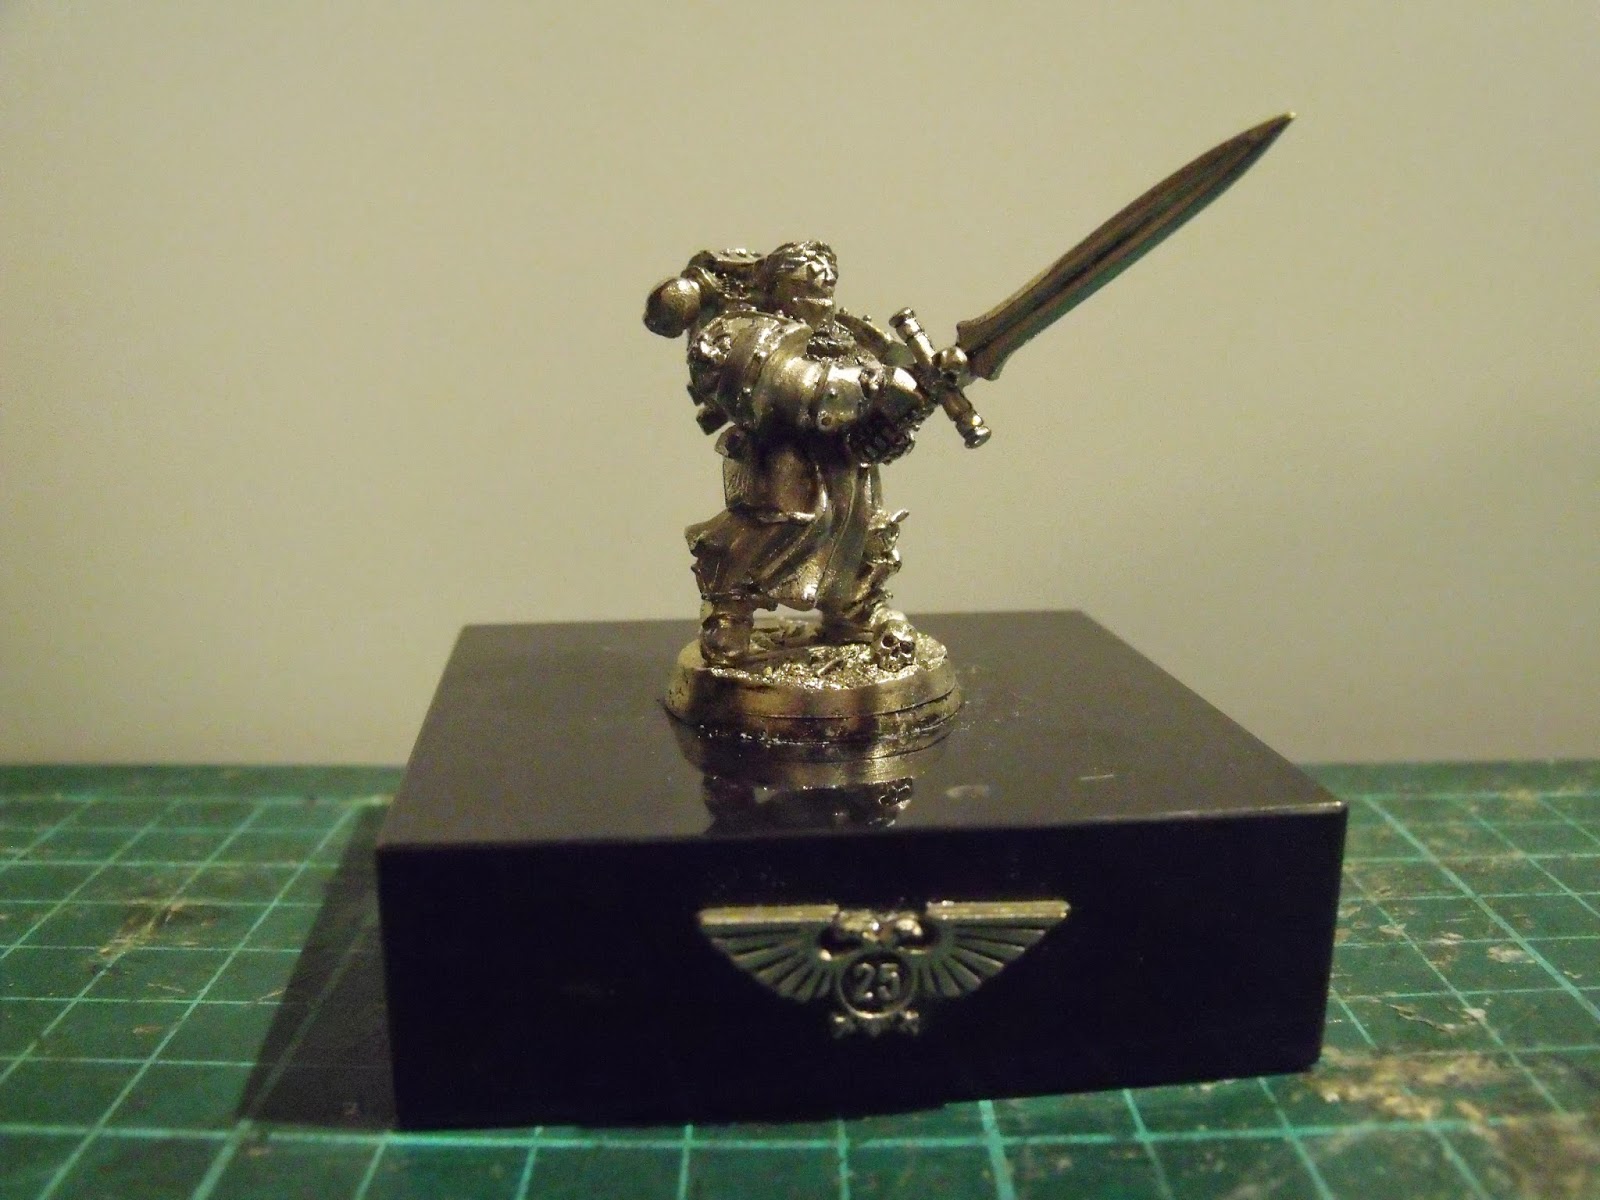 Limited Edition models: Warhammer anniversary - silver plated Emperor's Champion